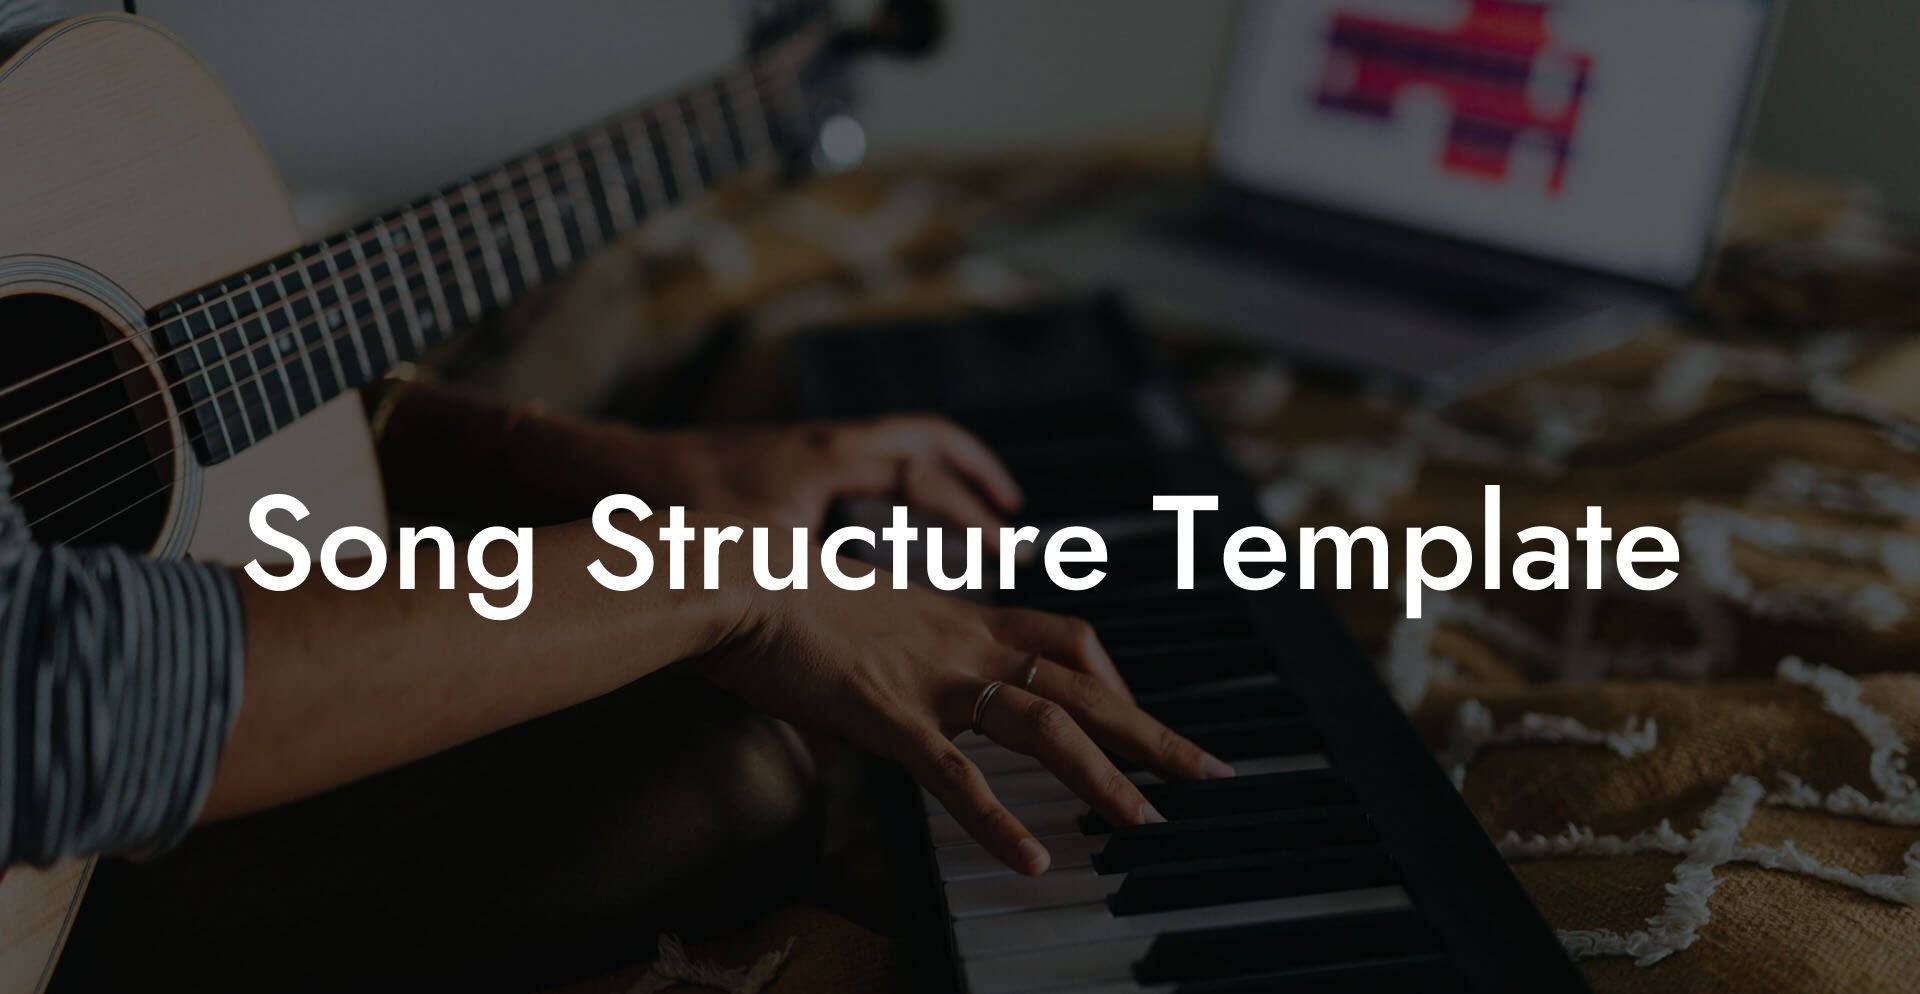 song structure template lyric assistant